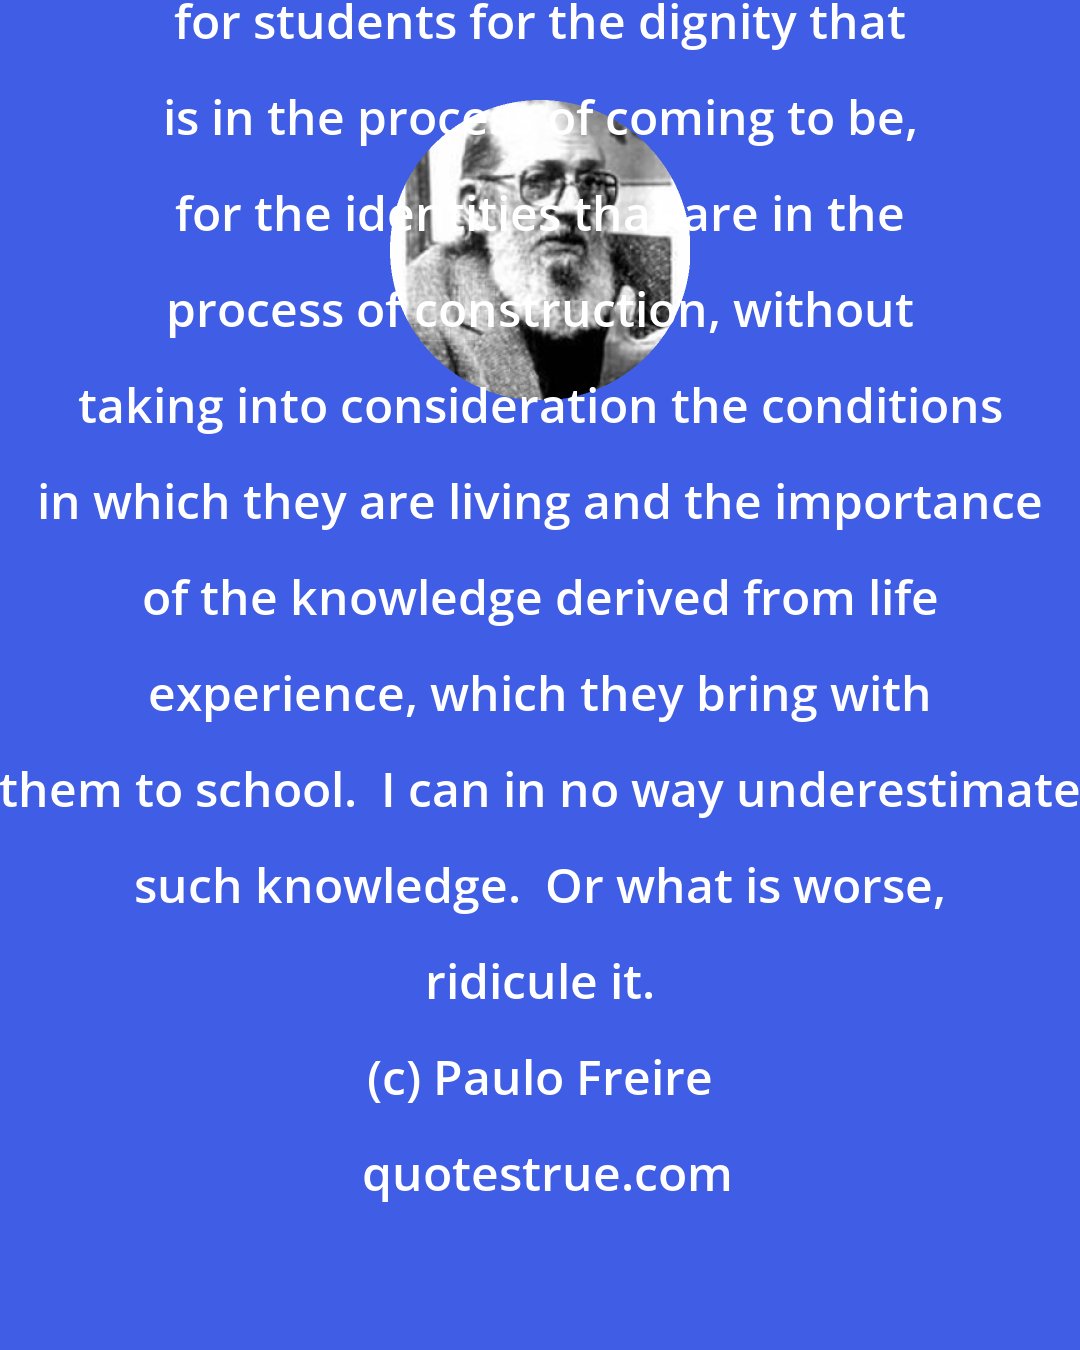 Paulo Freire: It is impossible to talk of respect for students for the dignity that is in the process of coming to be, for the identities that are in the process of construction, without taking into consideration the conditions in which they are living and the importance of the knowledge derived from life experience, which they bring with them to school.  I can in no way underestimate such knowledge.  Or what is worse, ridicule it.